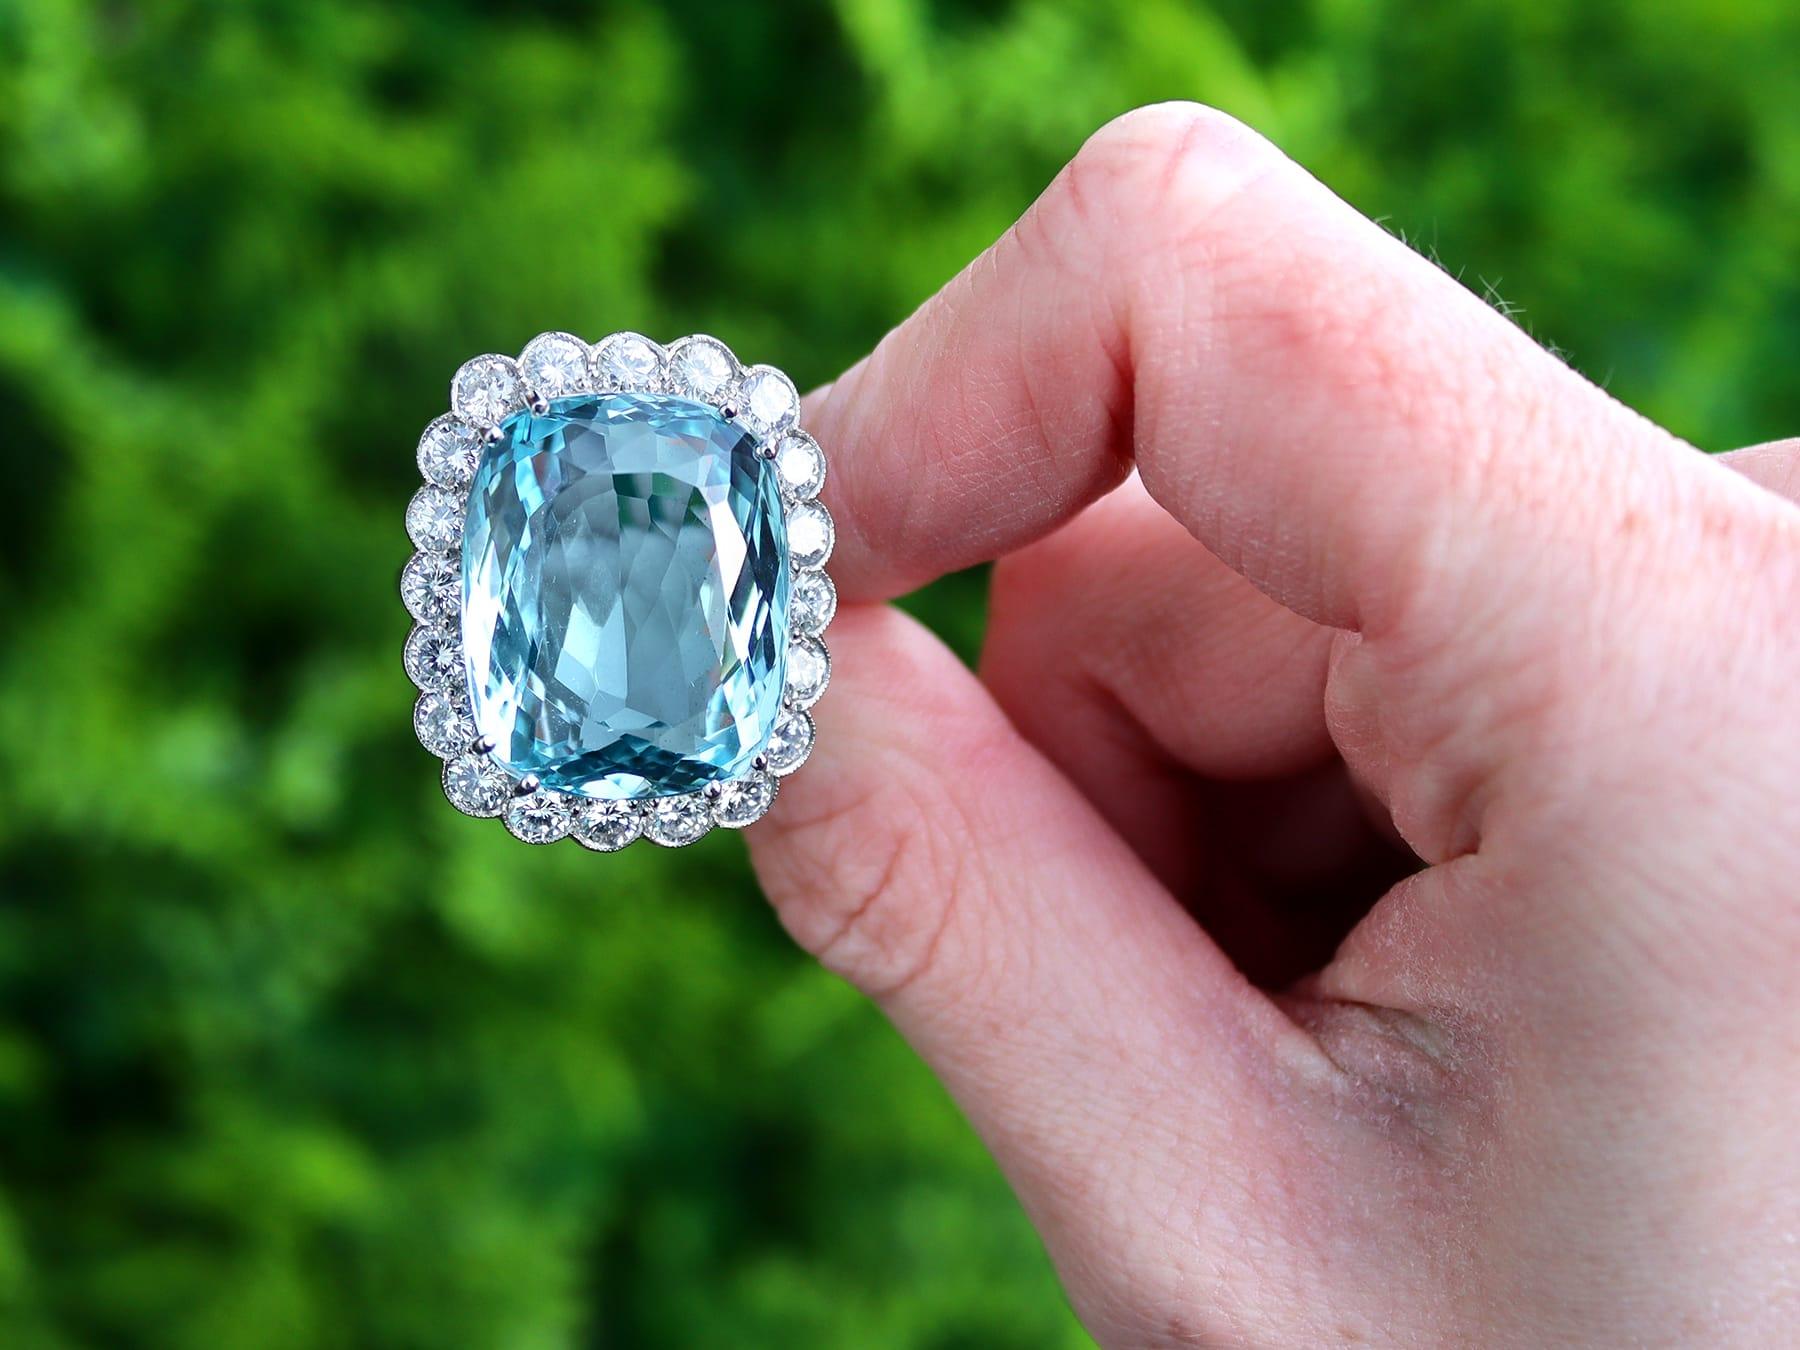 A stunning, fine and impressive 30.09 carat aquamarine and 2.94 carat diamond, 18 karat yellow gold and 18 karat white gold set dress ring; part of our diverse aquamarine jewelry and estate jewelry collections.

This stunning, fine and impressive